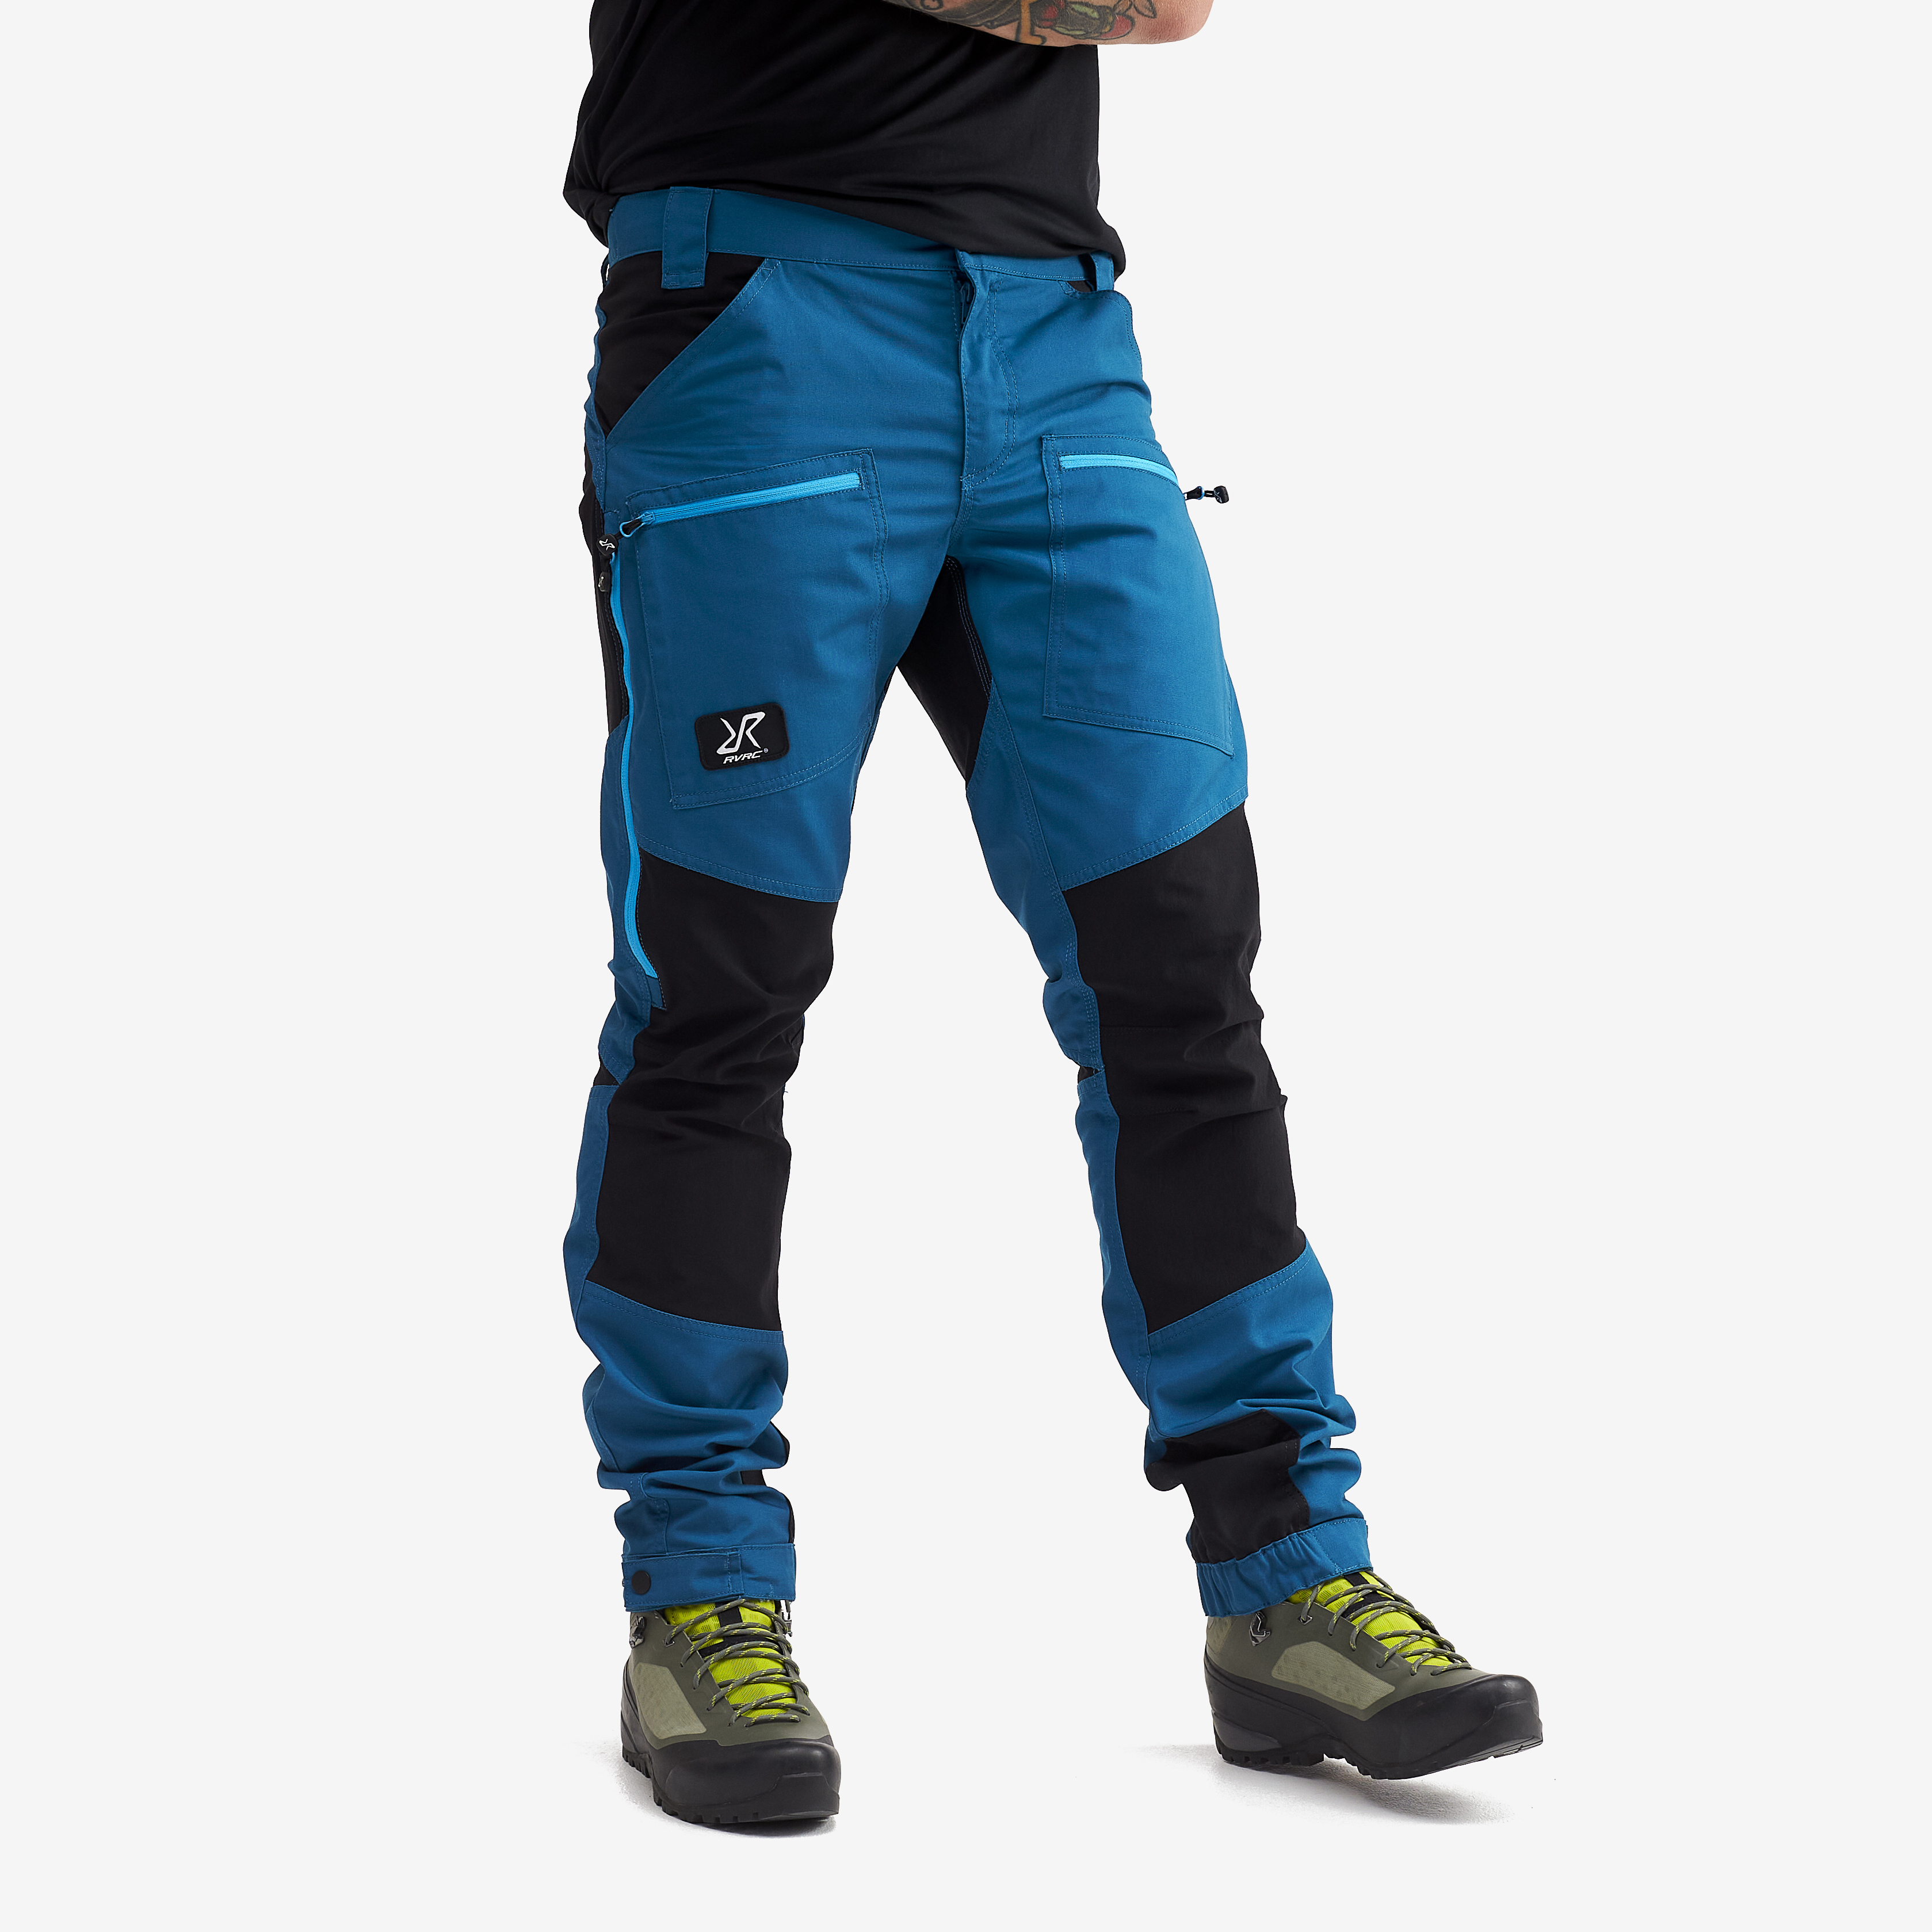 RevolutionRace Men’s Nordwand Pants Durable Pants for All Outdoor Activities